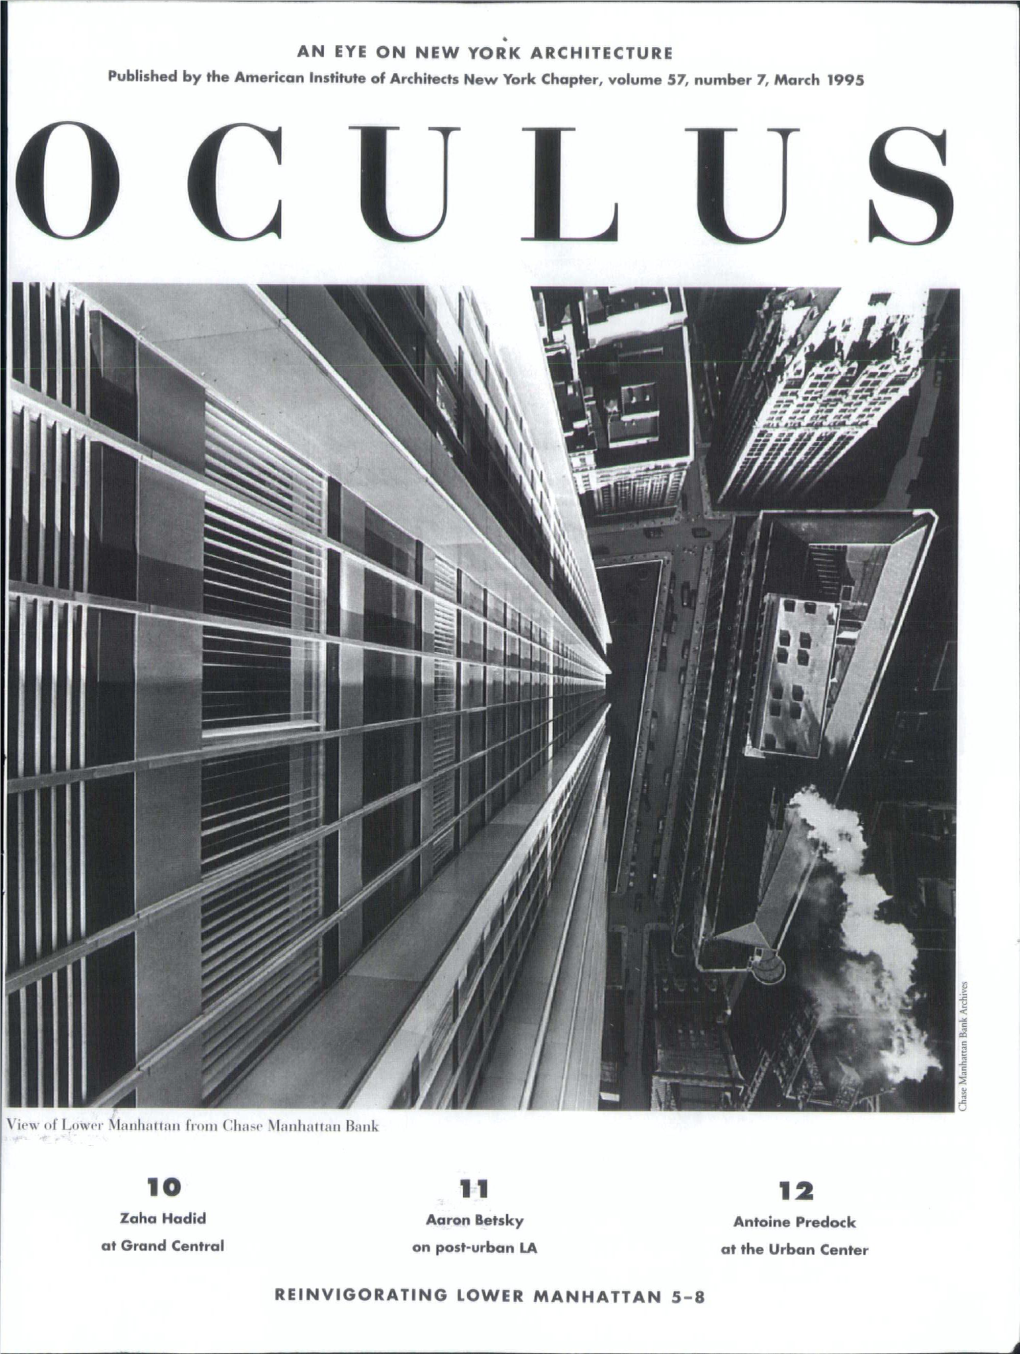 AN EYE on NEW YORK ARCHITECTURE Published by the American Institute of Architects New York Chapter, Volume 57, Number 7, March 1995 U L